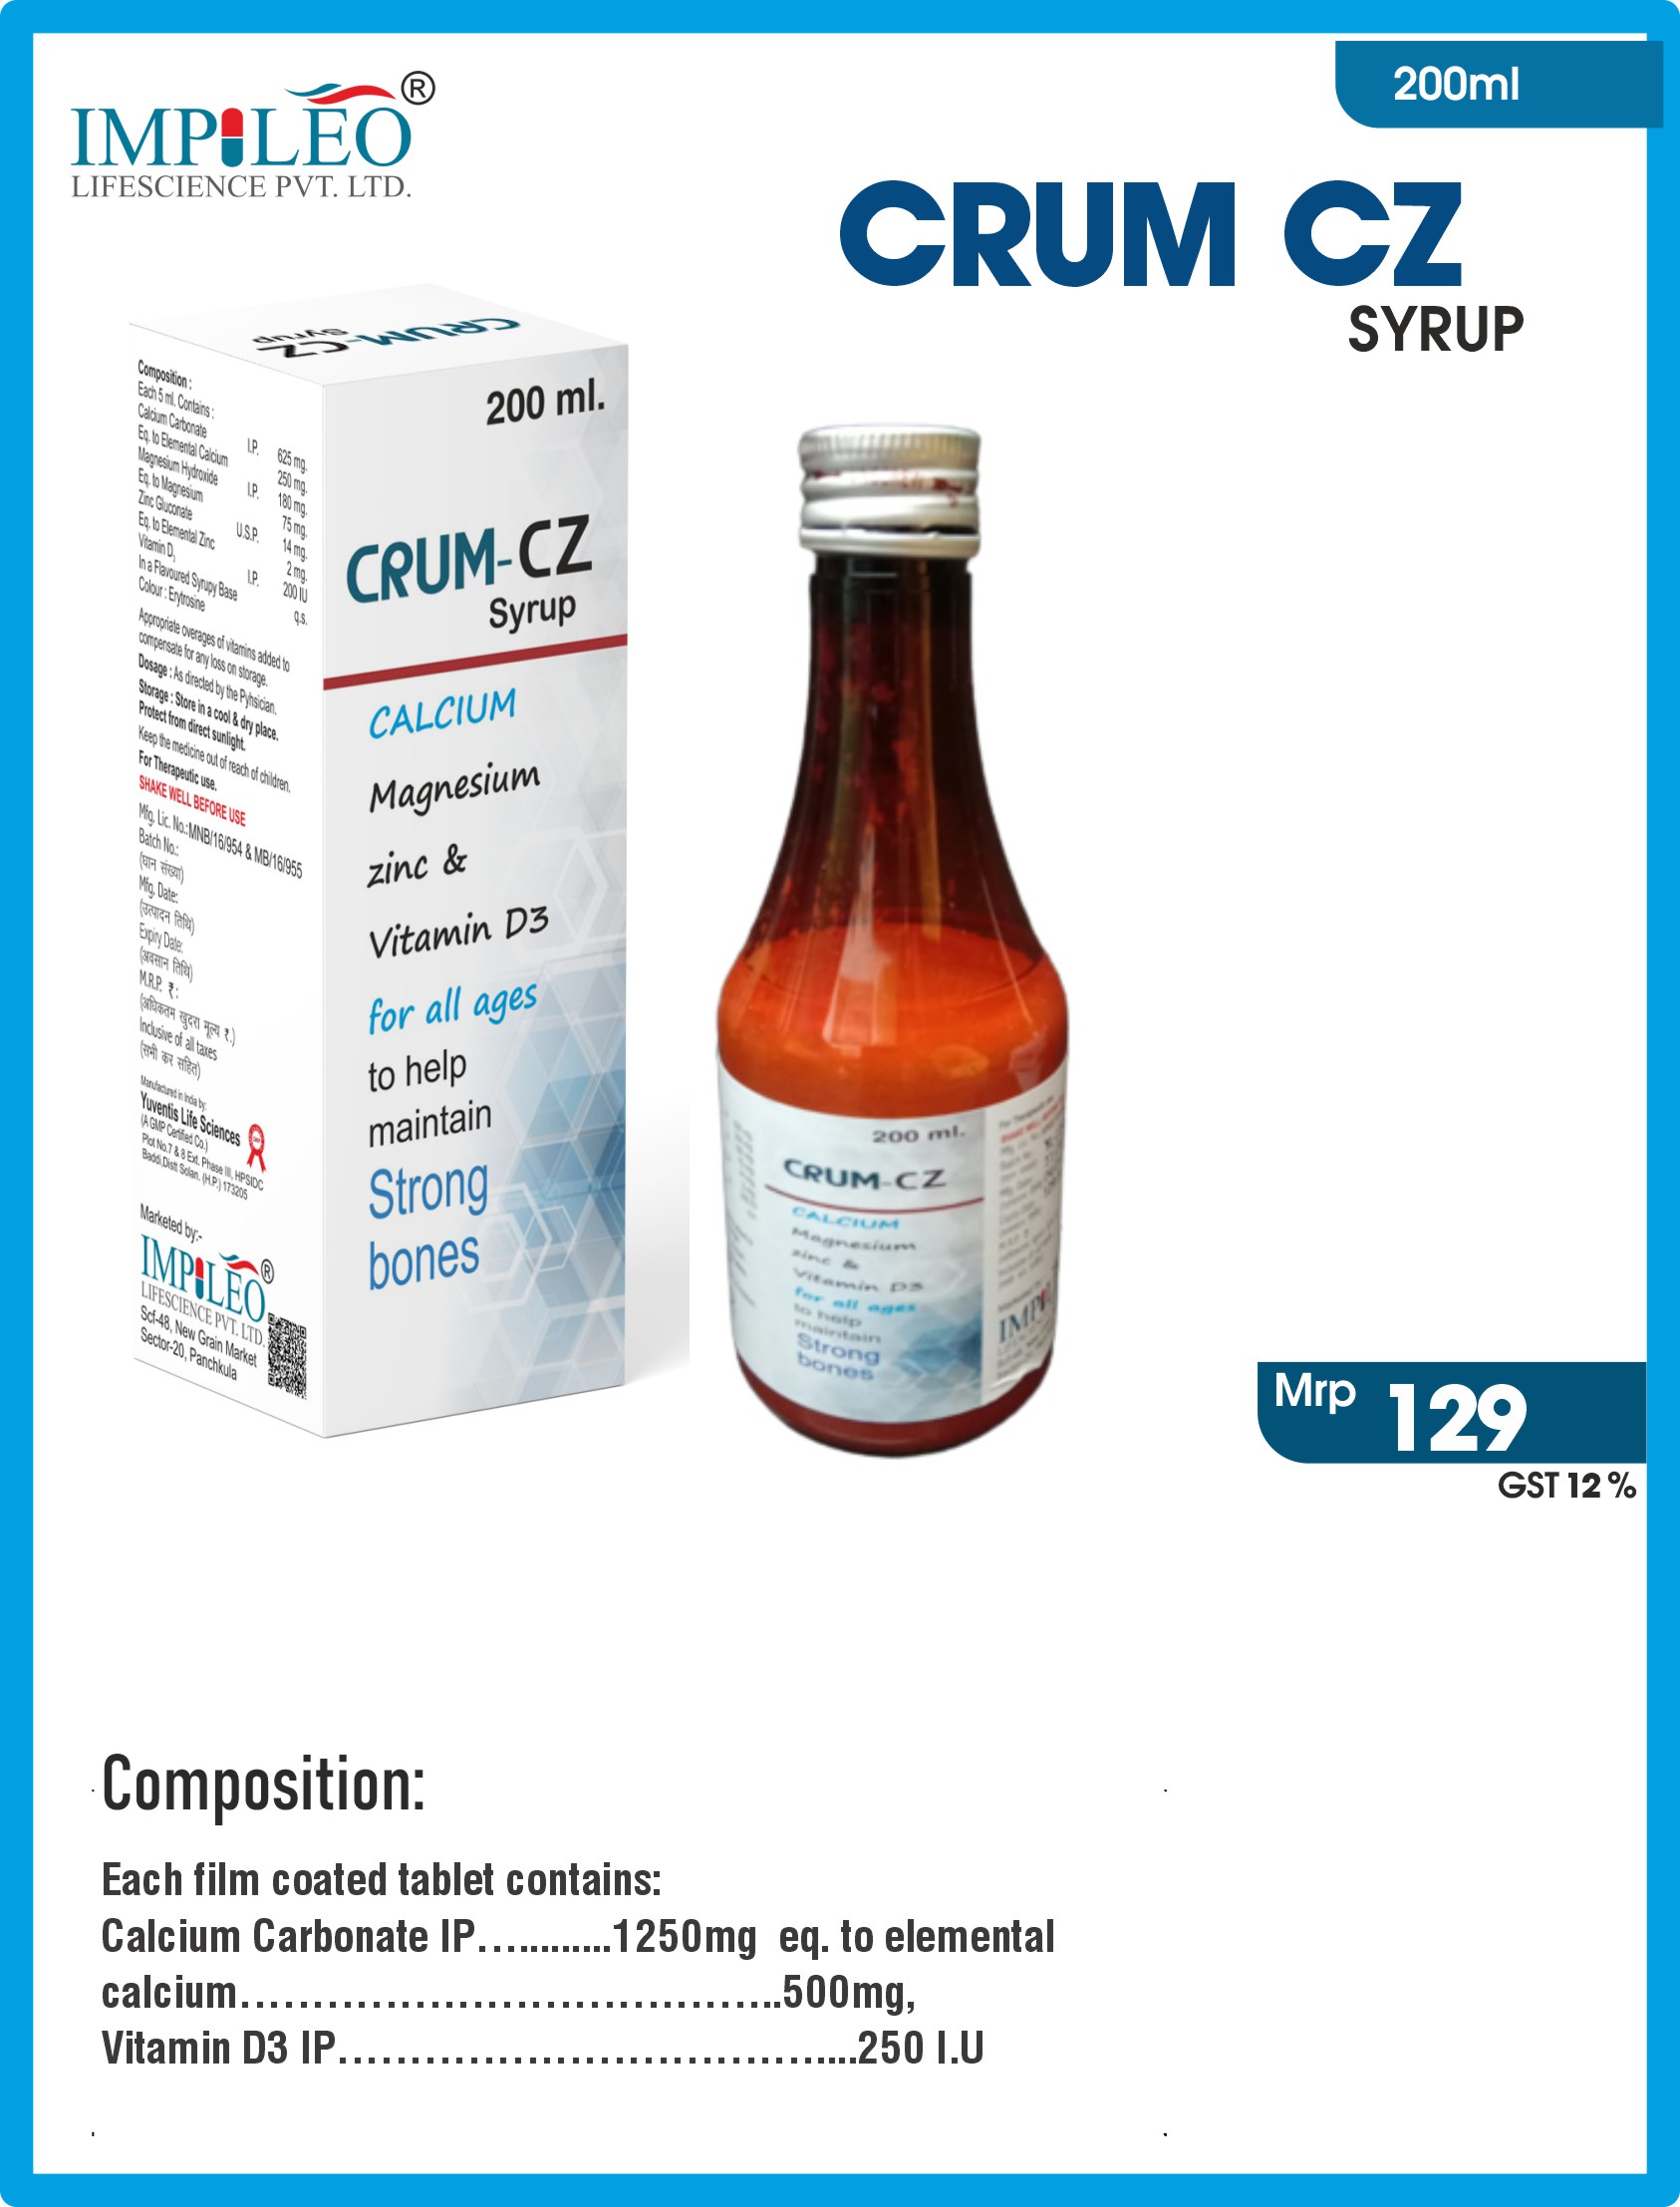 Optimize Respiratory Health with CRUM CZ SYRUP : Superior Relief from Top PCD Pharma Franchise in India